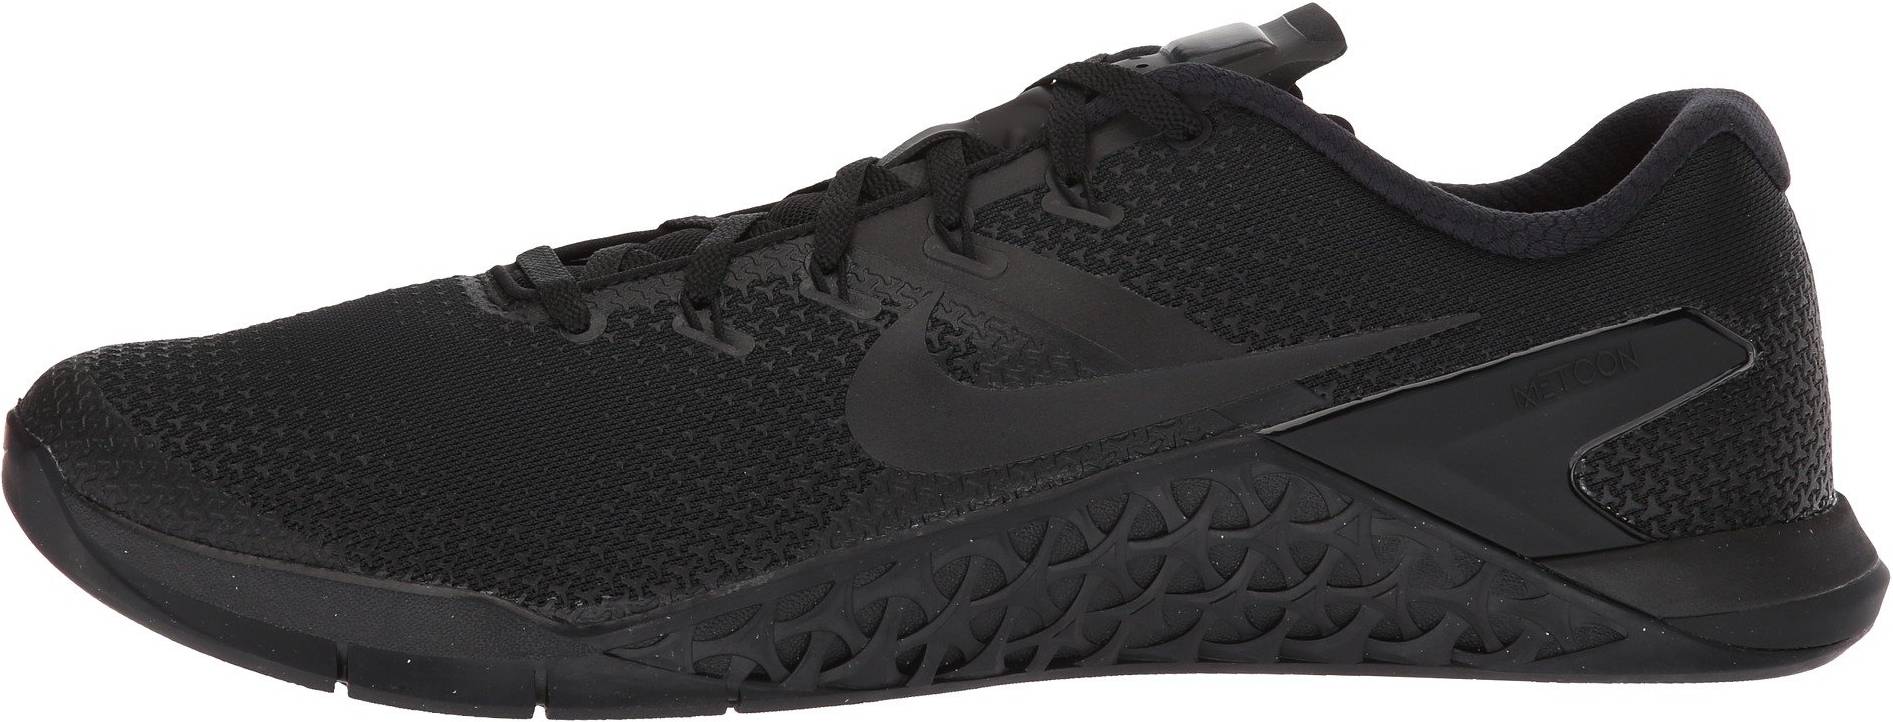 Only £83 + Review of Nike Metcon 4 